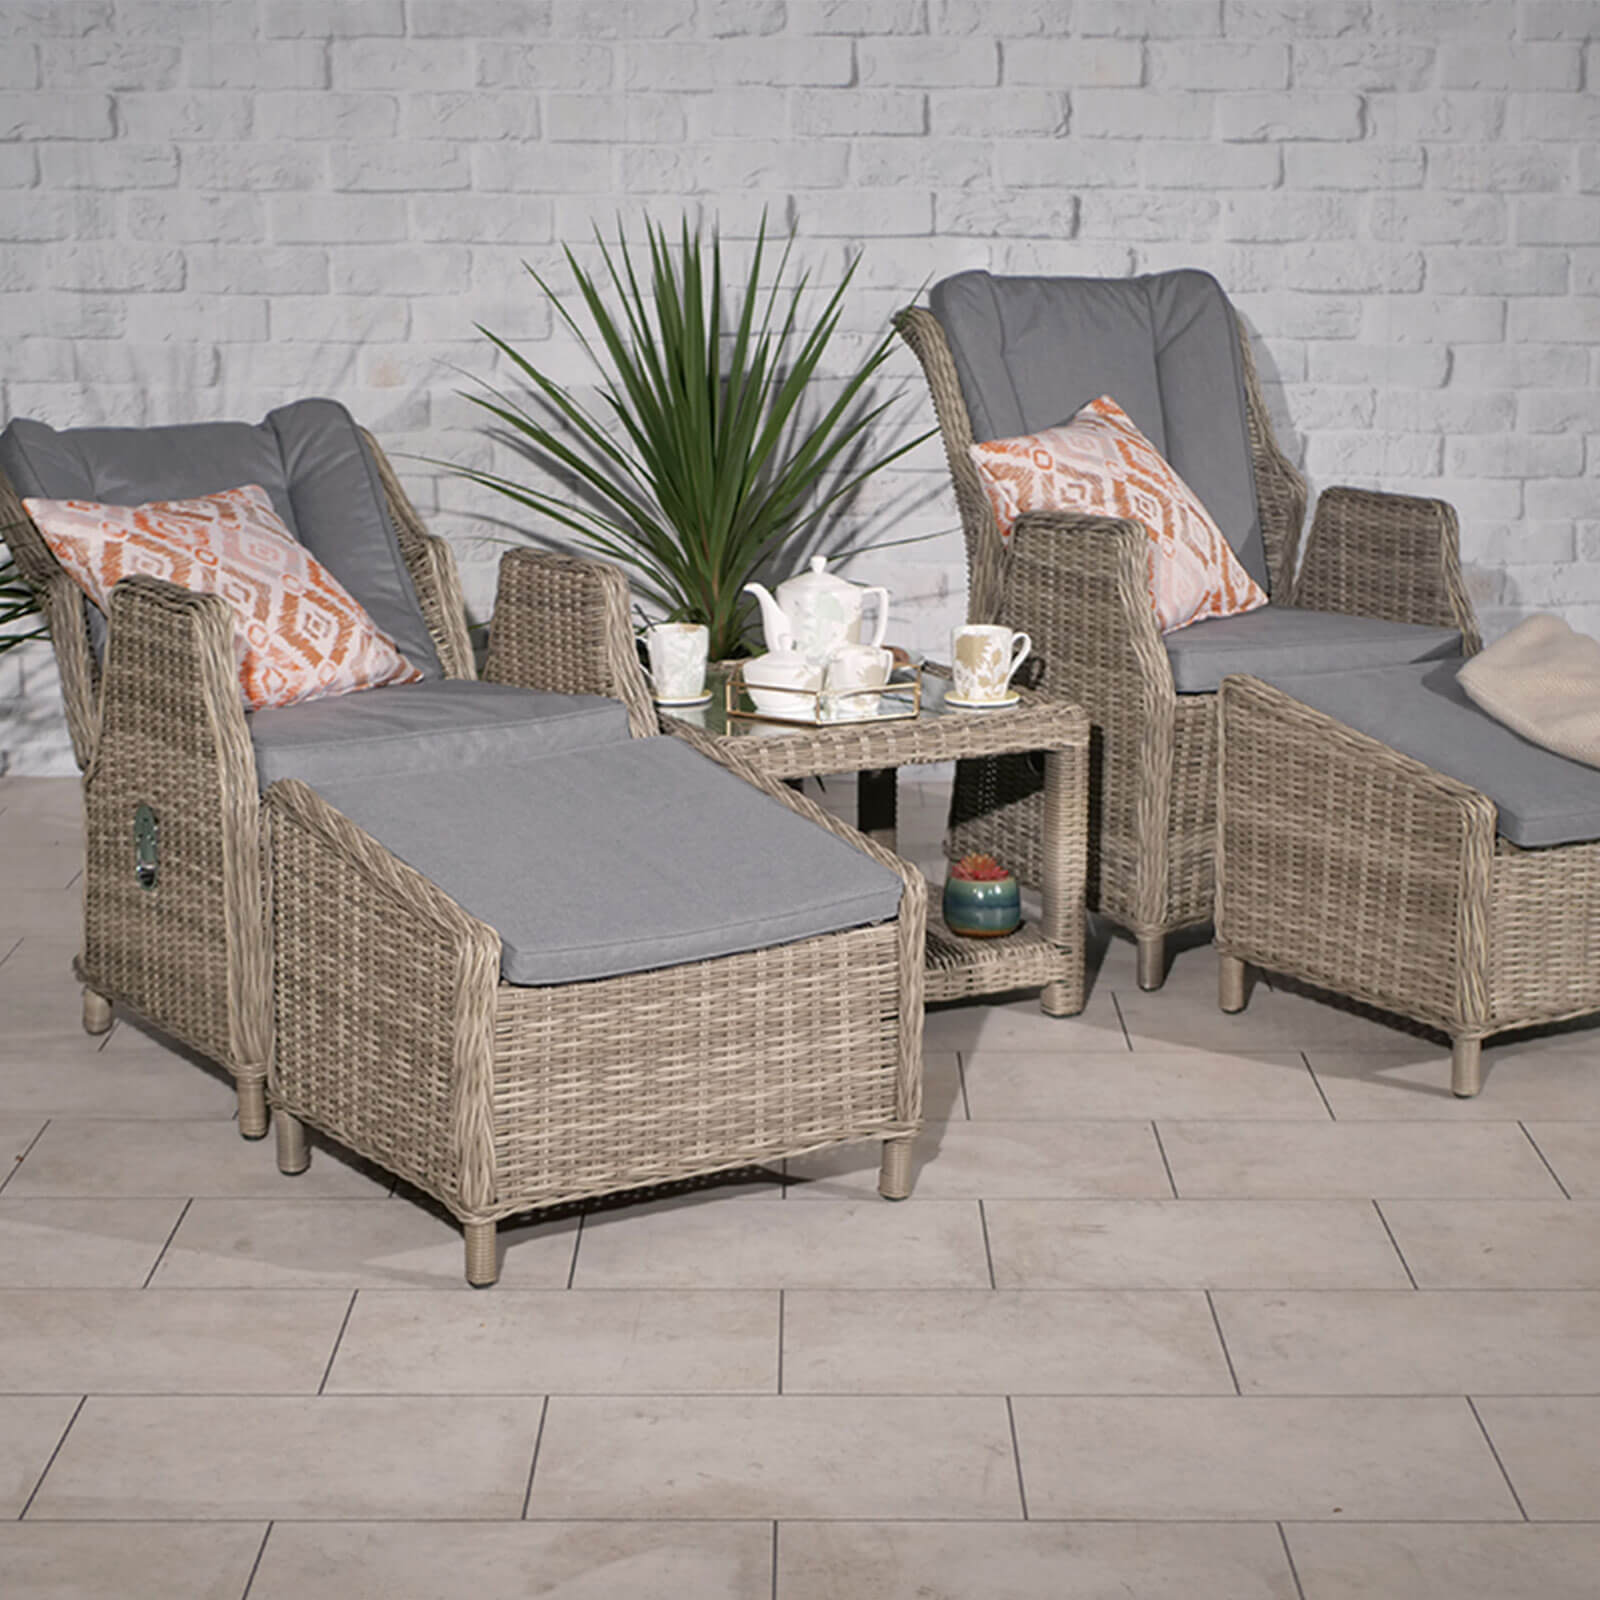 Ballintoy 2 seat companion set with 2 high back recliner armchairs with 2 footstools and a small coffee table in beige rattan and grey cushions in a patio setting and chairs reclined back